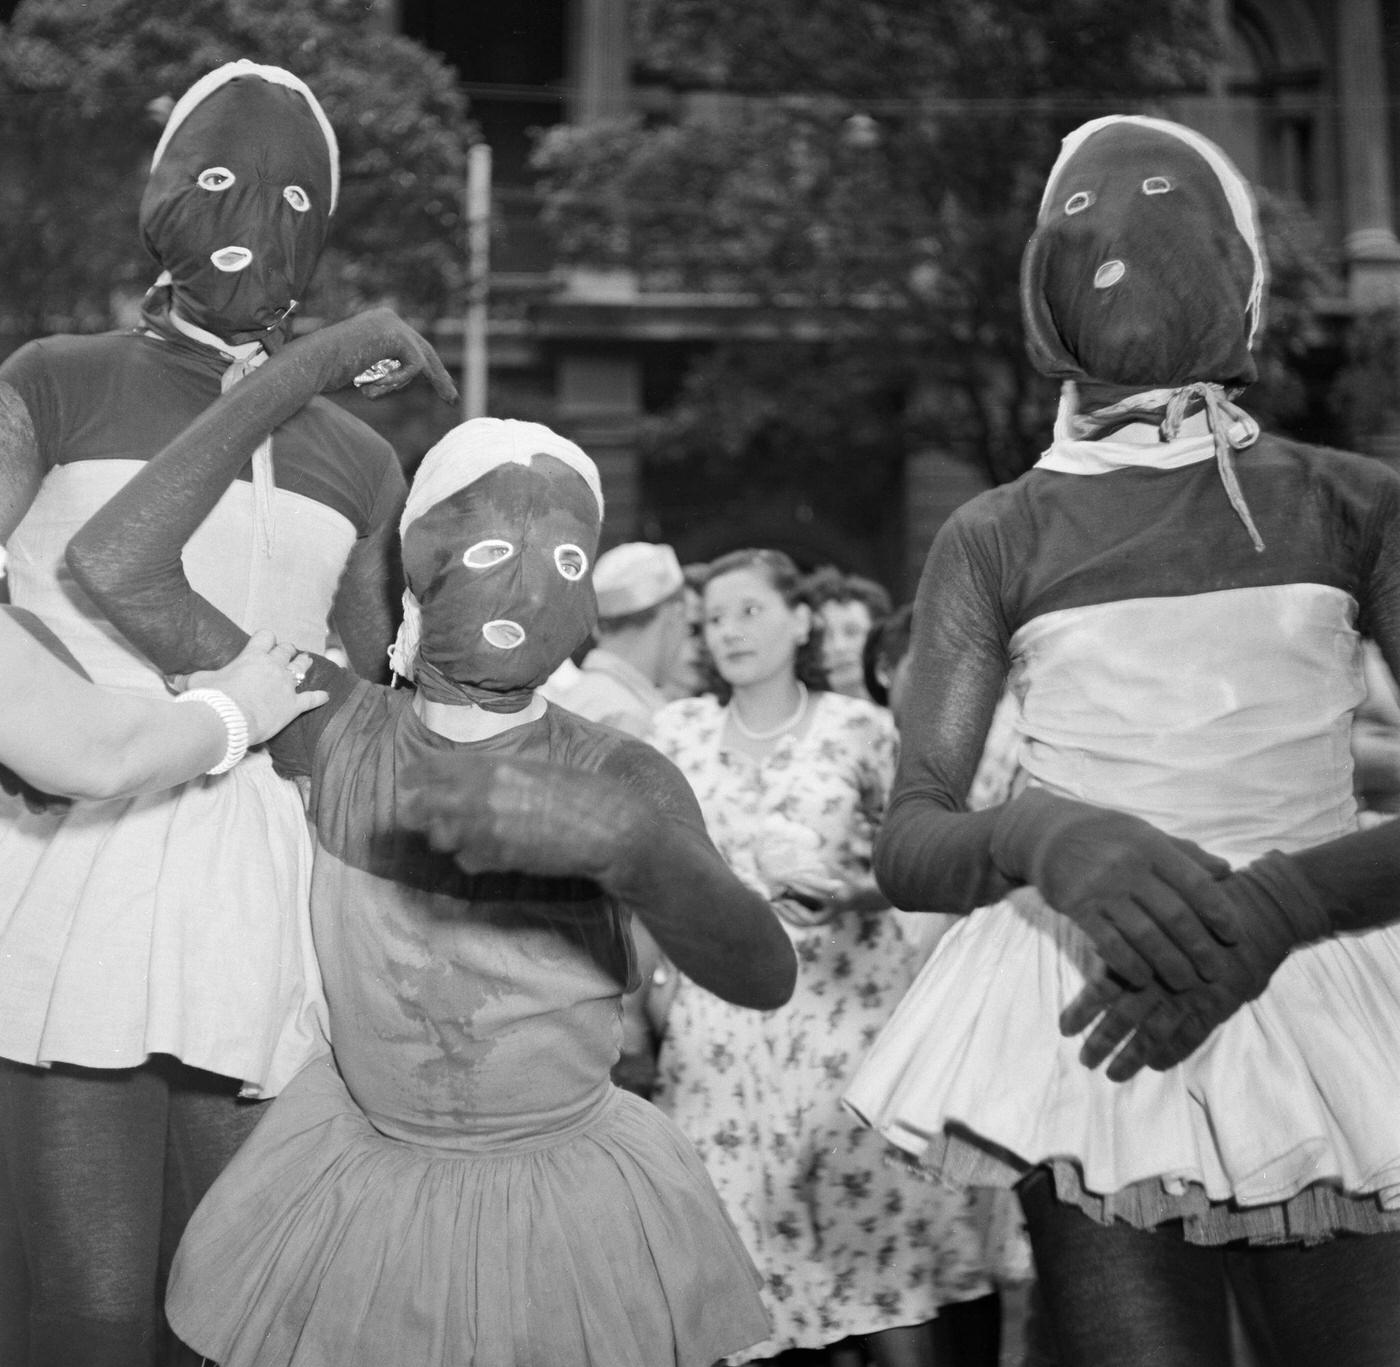 Dancing and Partying in Costumes, Rio Carnival 1953